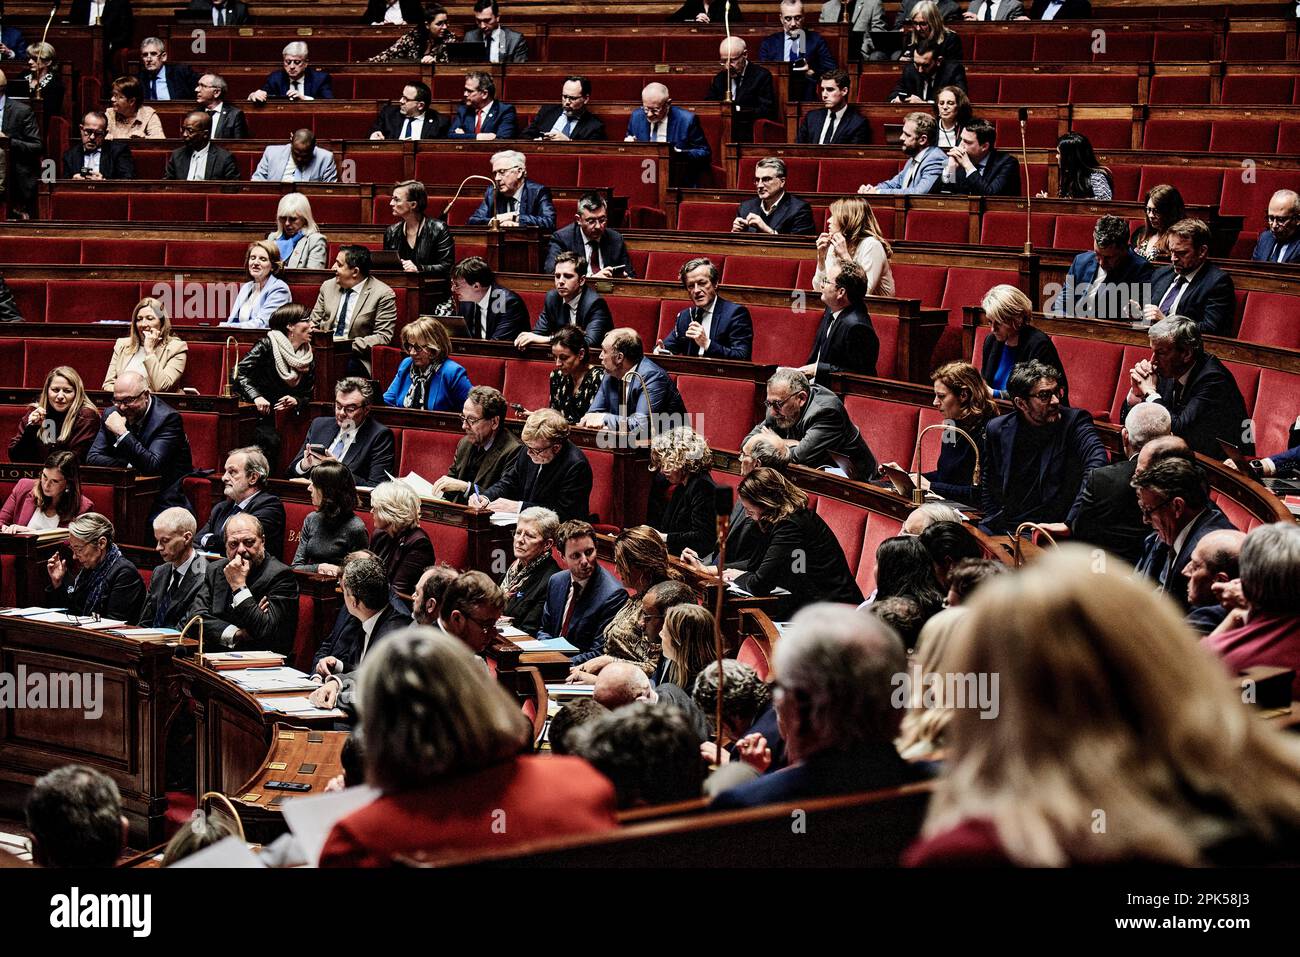 Antonin Burat / Le Pictorium -  Government question session of 4 April 2023 at the National Assembly  -  4/4/2023  -  France / Ile-de-France (region) / Paris  -  Government question session of 4 April 2023 at the National Assembly. Stock Photo